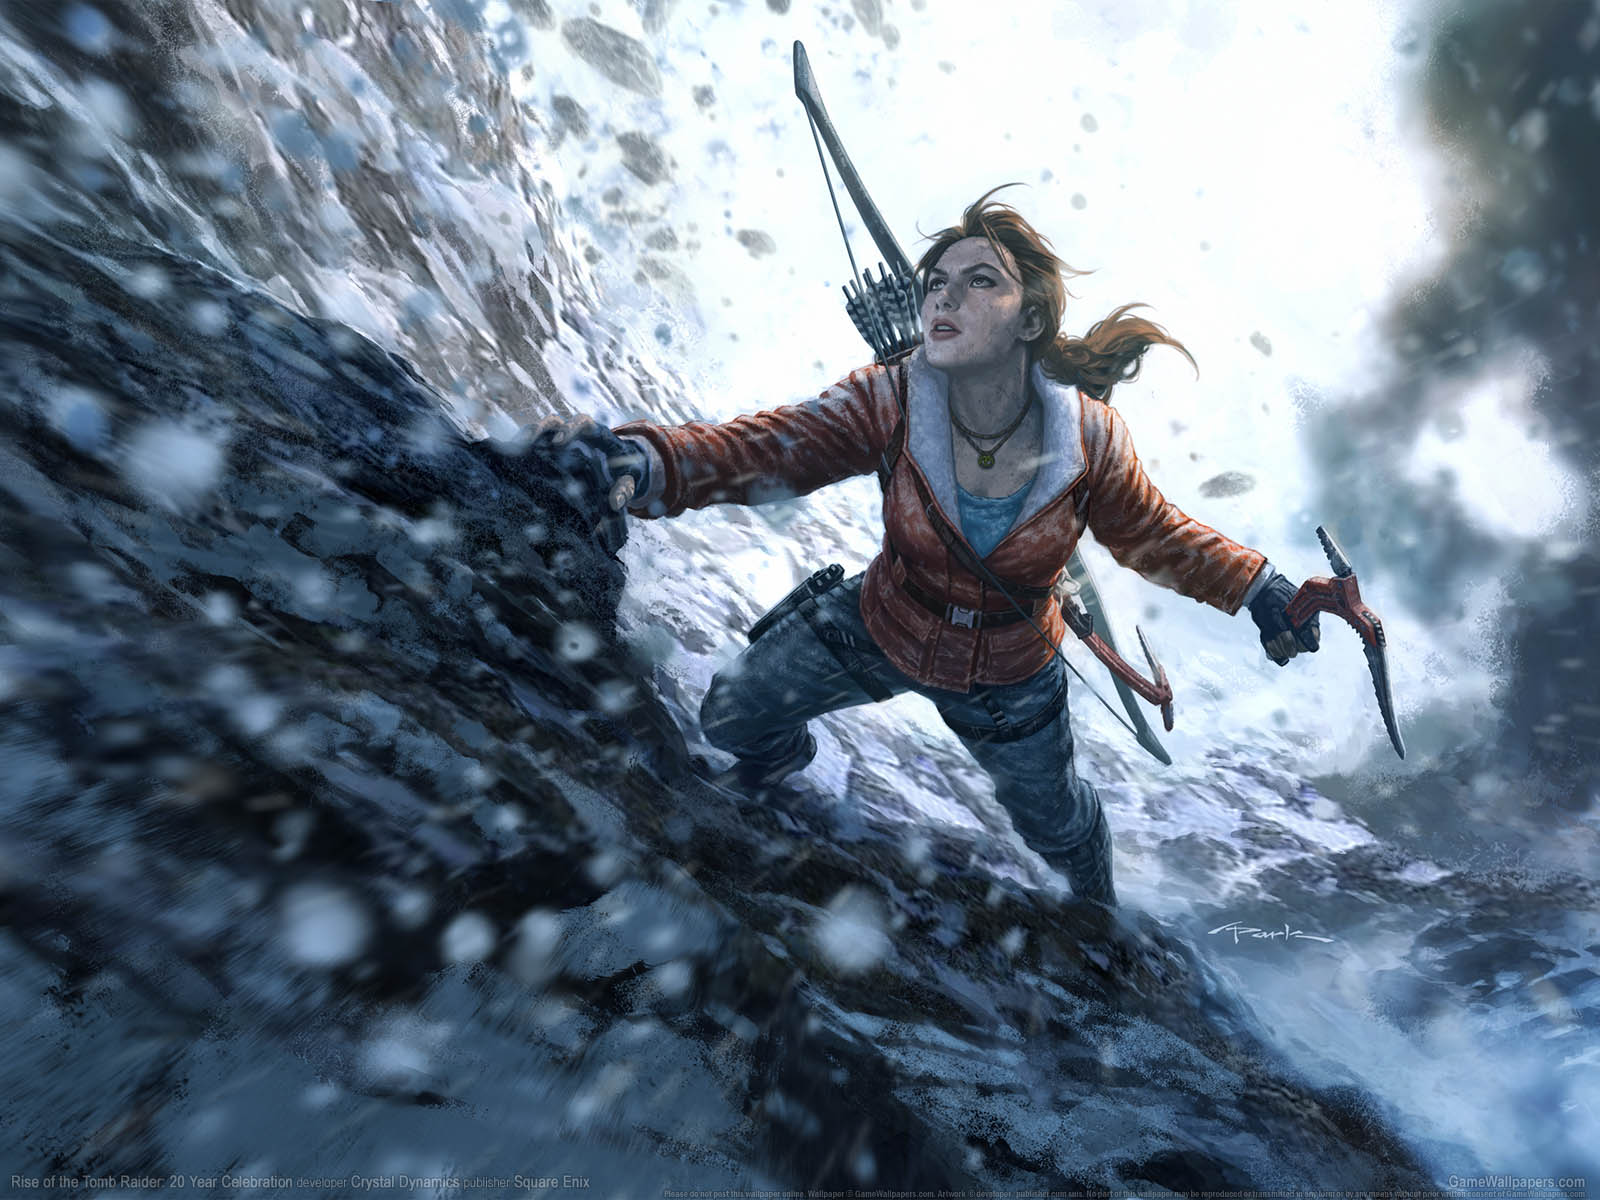 Rise of the Tomb Raider%25253A 20 Year Celebration wallpaper 02 1600x1200